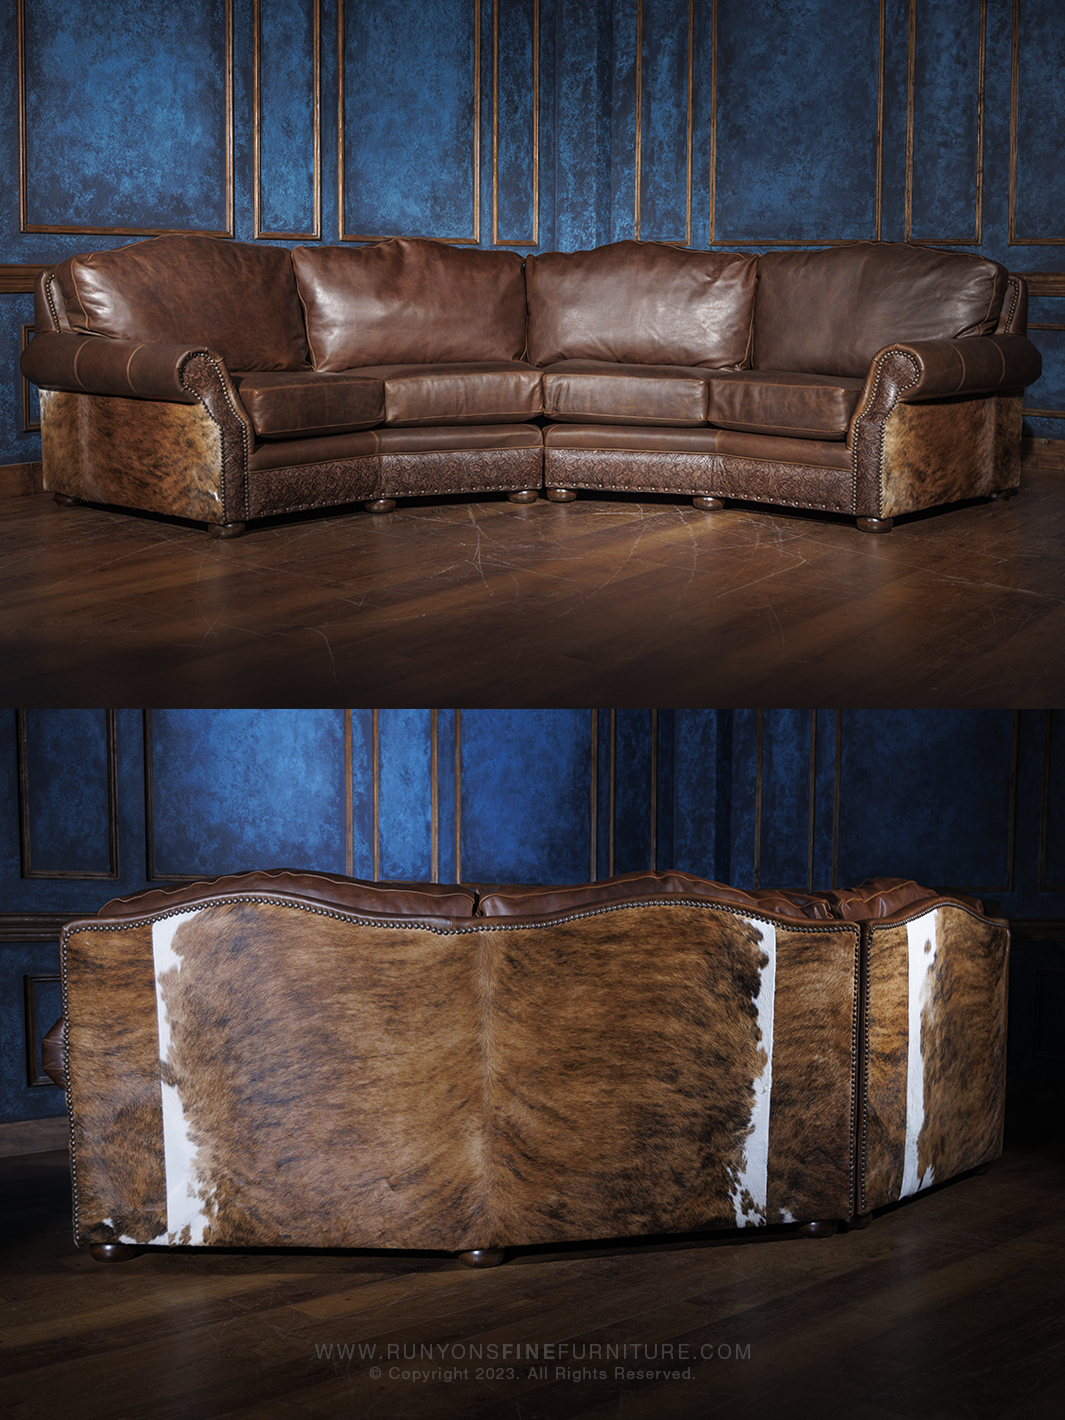 Rustic Western Leather Sofas